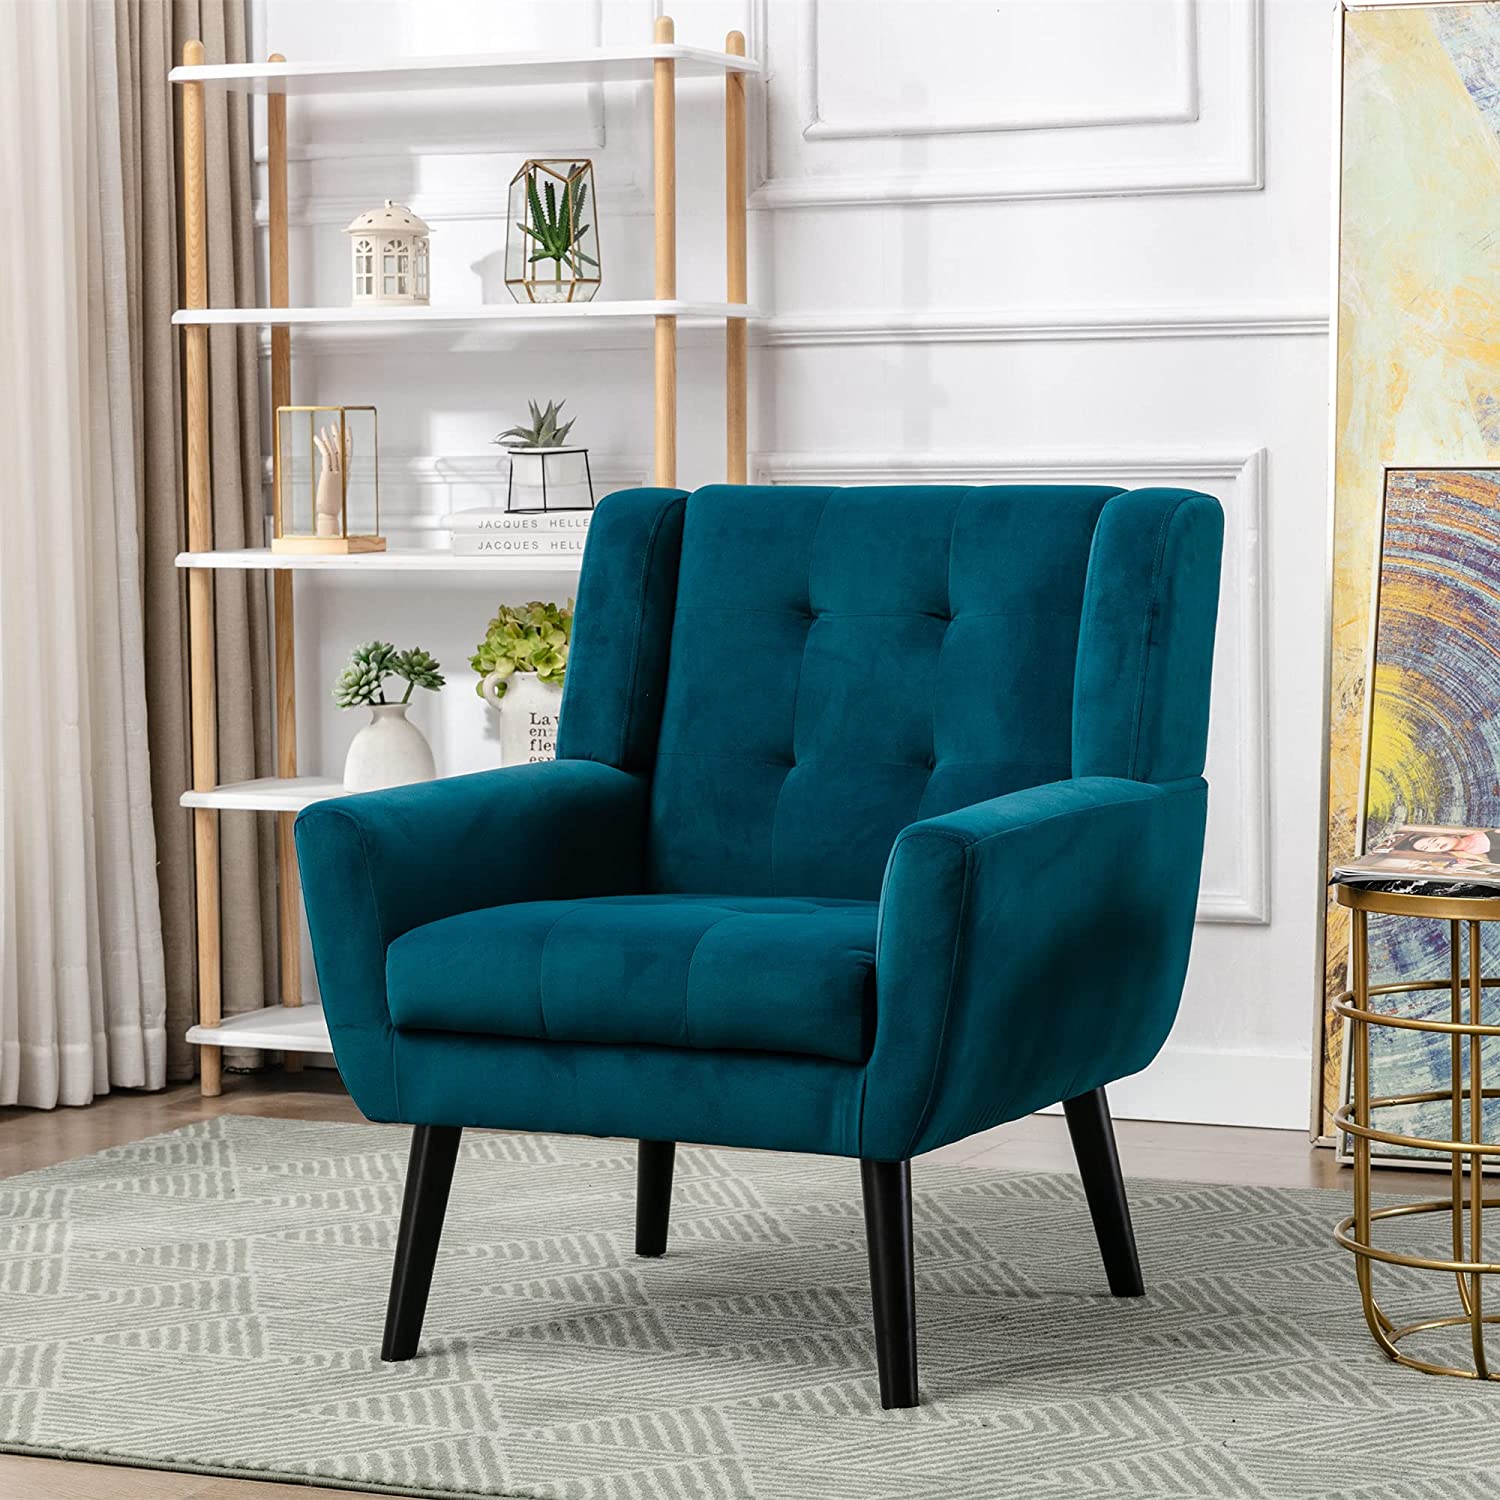 Modern Accent Chair with Arms, Upholstered Linen Fabric Reading Side Chair Tufted Back Decorative Wingback Chair for Living Room Bedroom